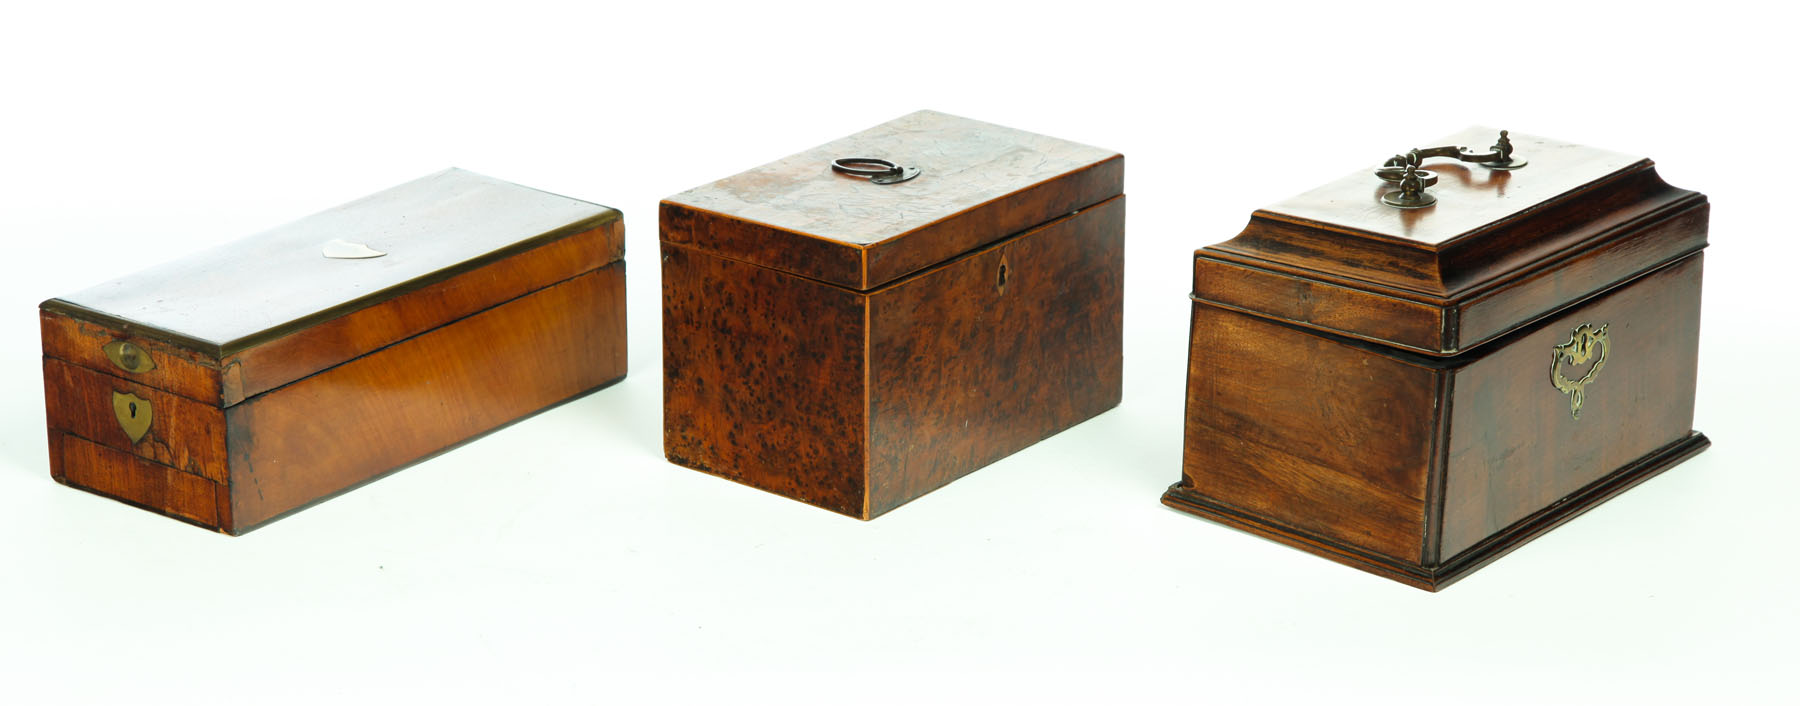 TWO TEA CADDIES AND A JEWELRY BOX  1137fb